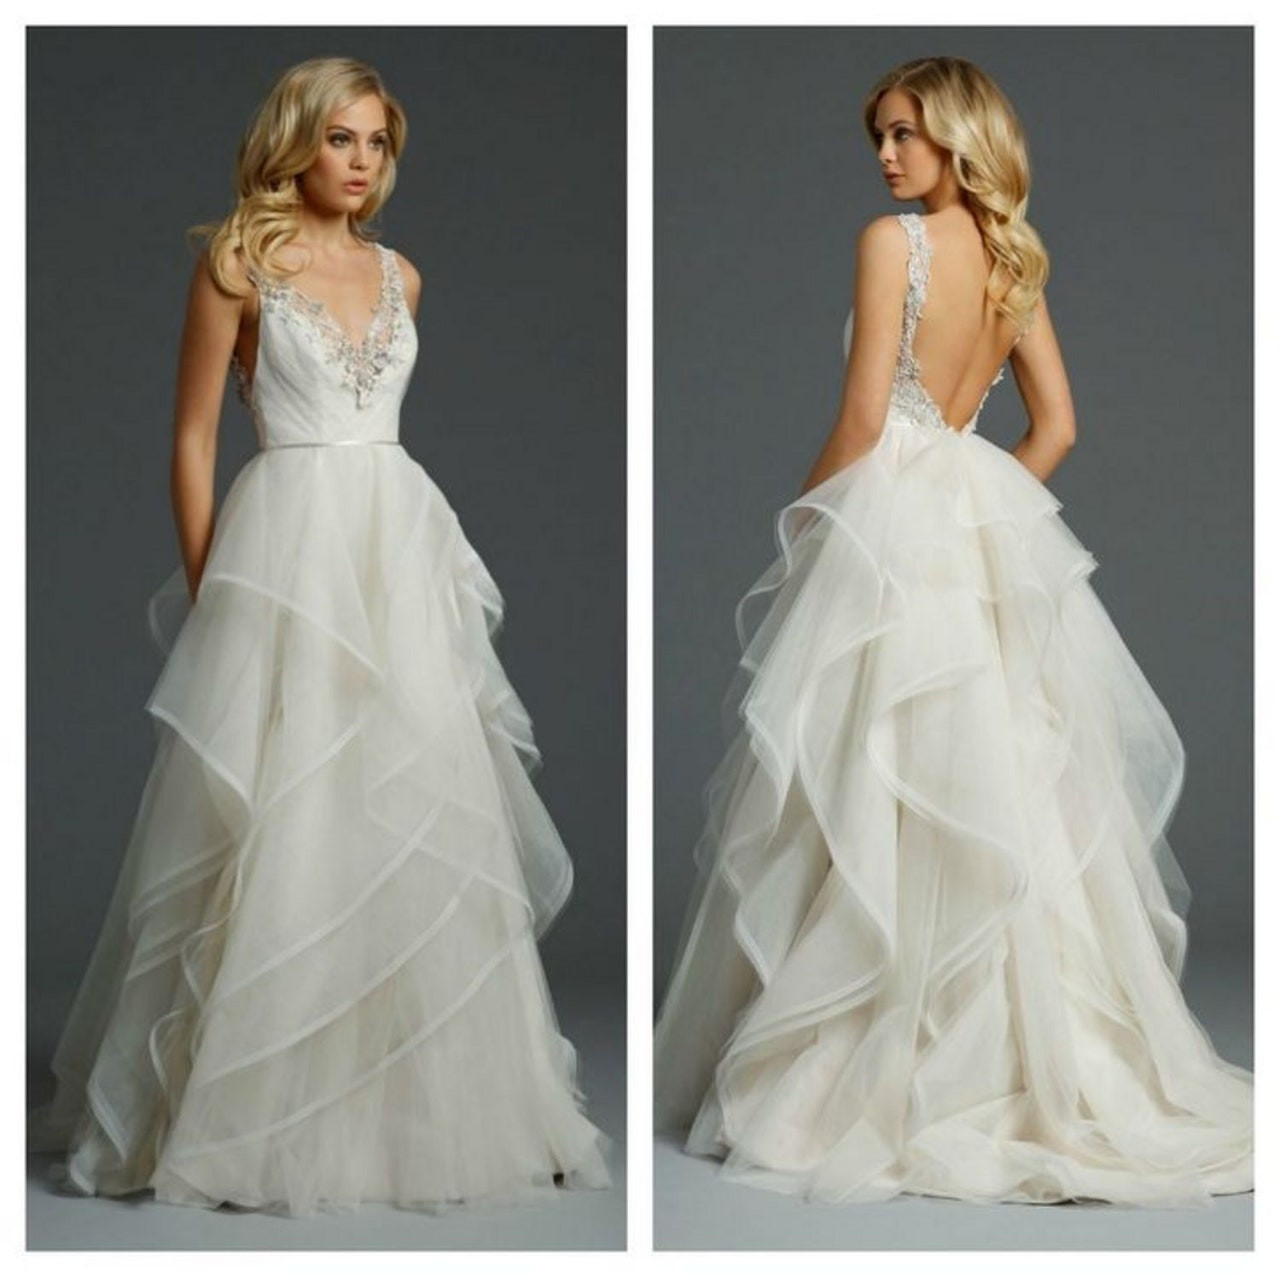 Popular Wedding Dresses
 Here s Exactly Where to Buy the Wedding Dresses You re